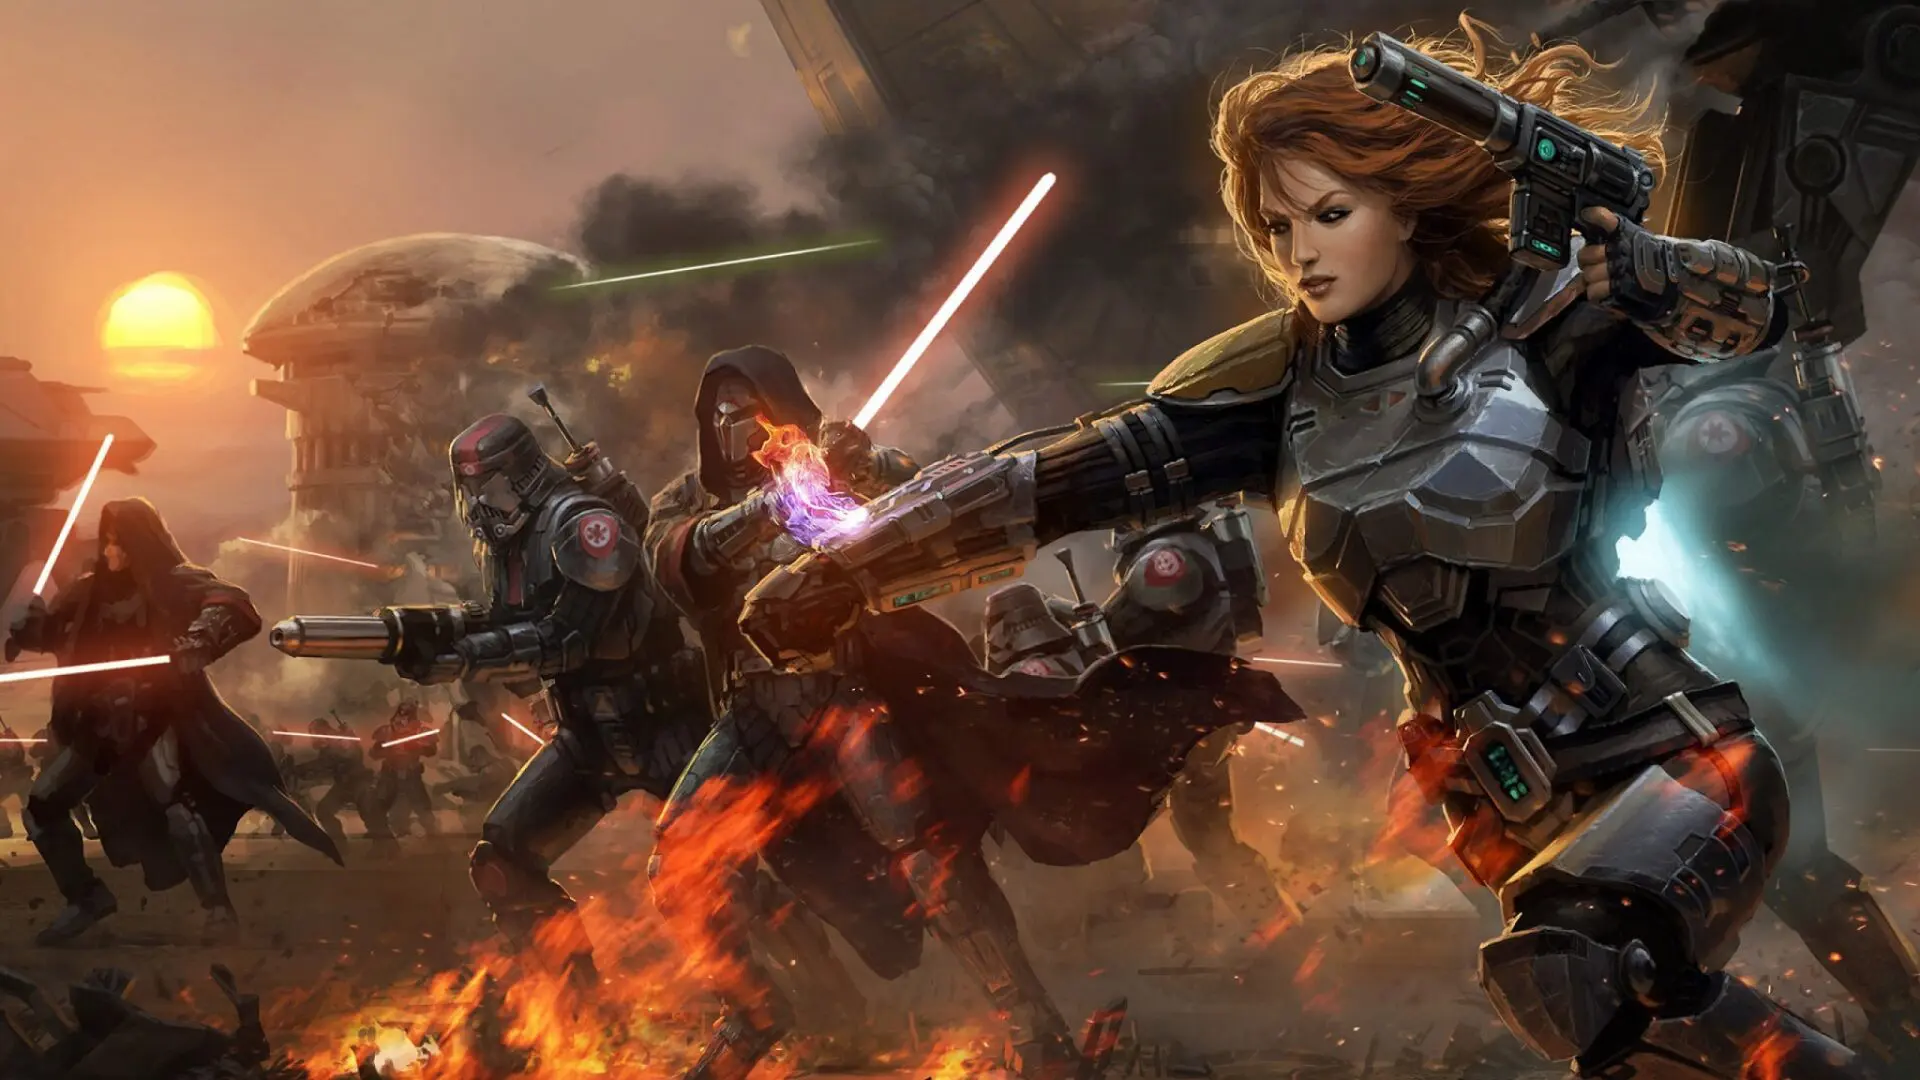 Star Wars: The Old Republic Launches PvP Season 2 Next Week